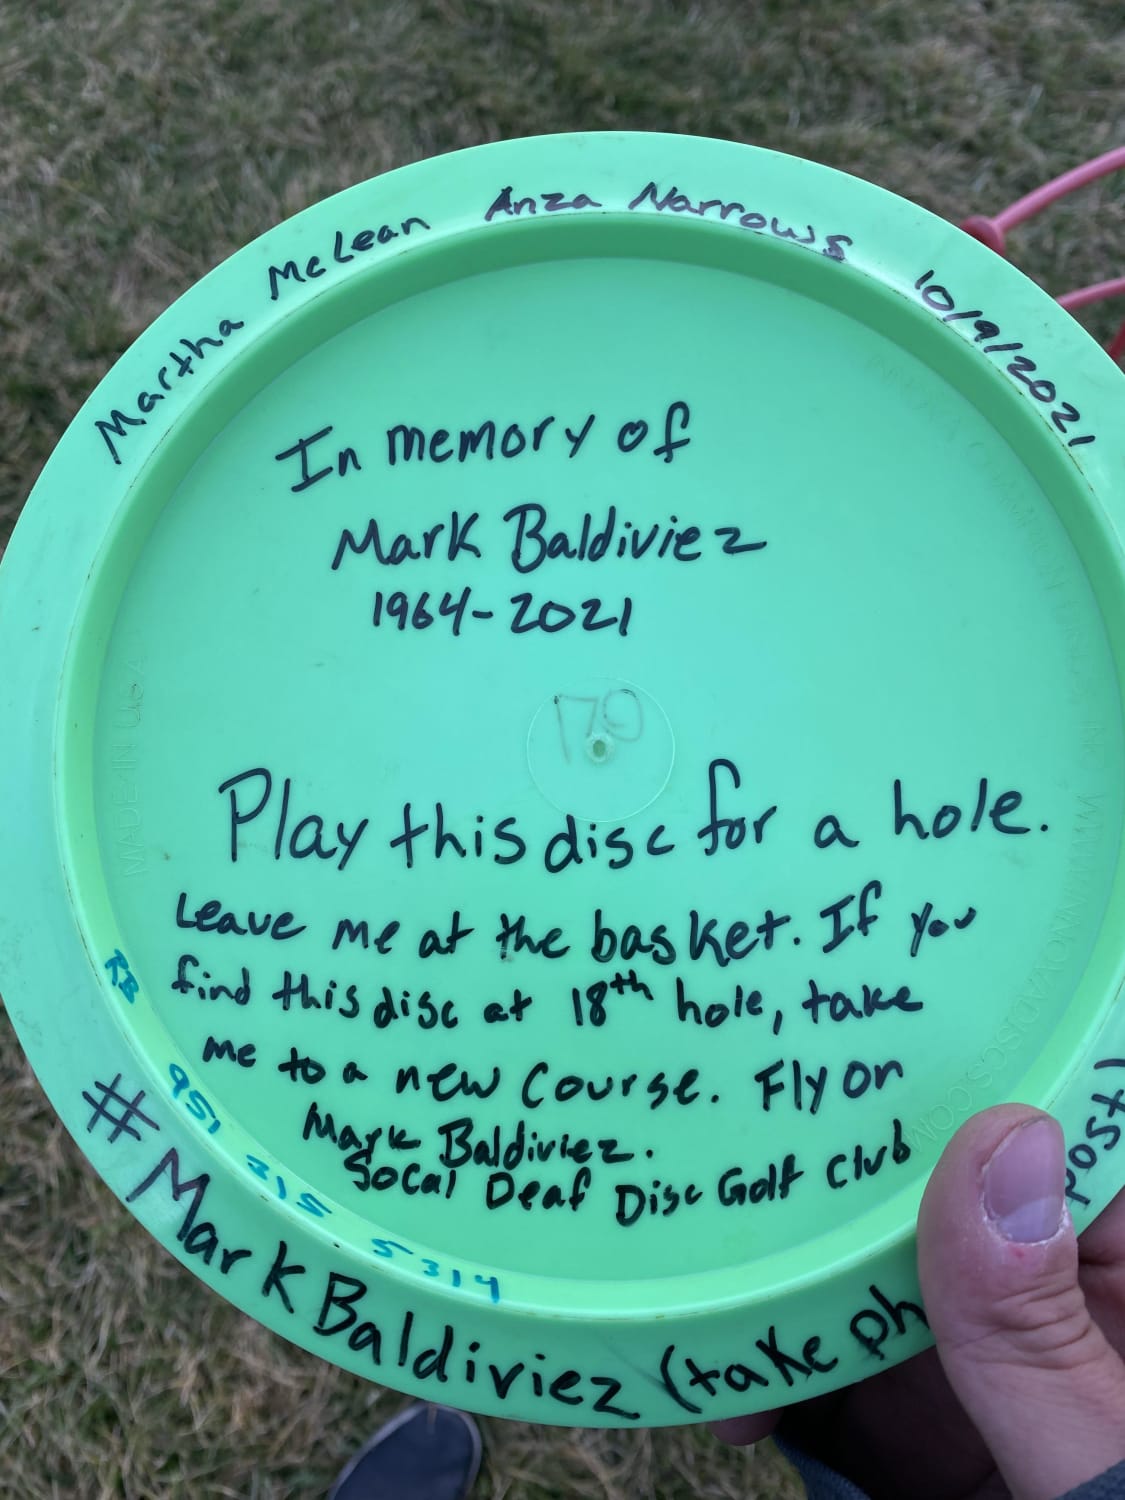 Stumbled upon this disc at my local course. Mark wherever your spirit may be, your disc is flying in your honor. Rest in peace.